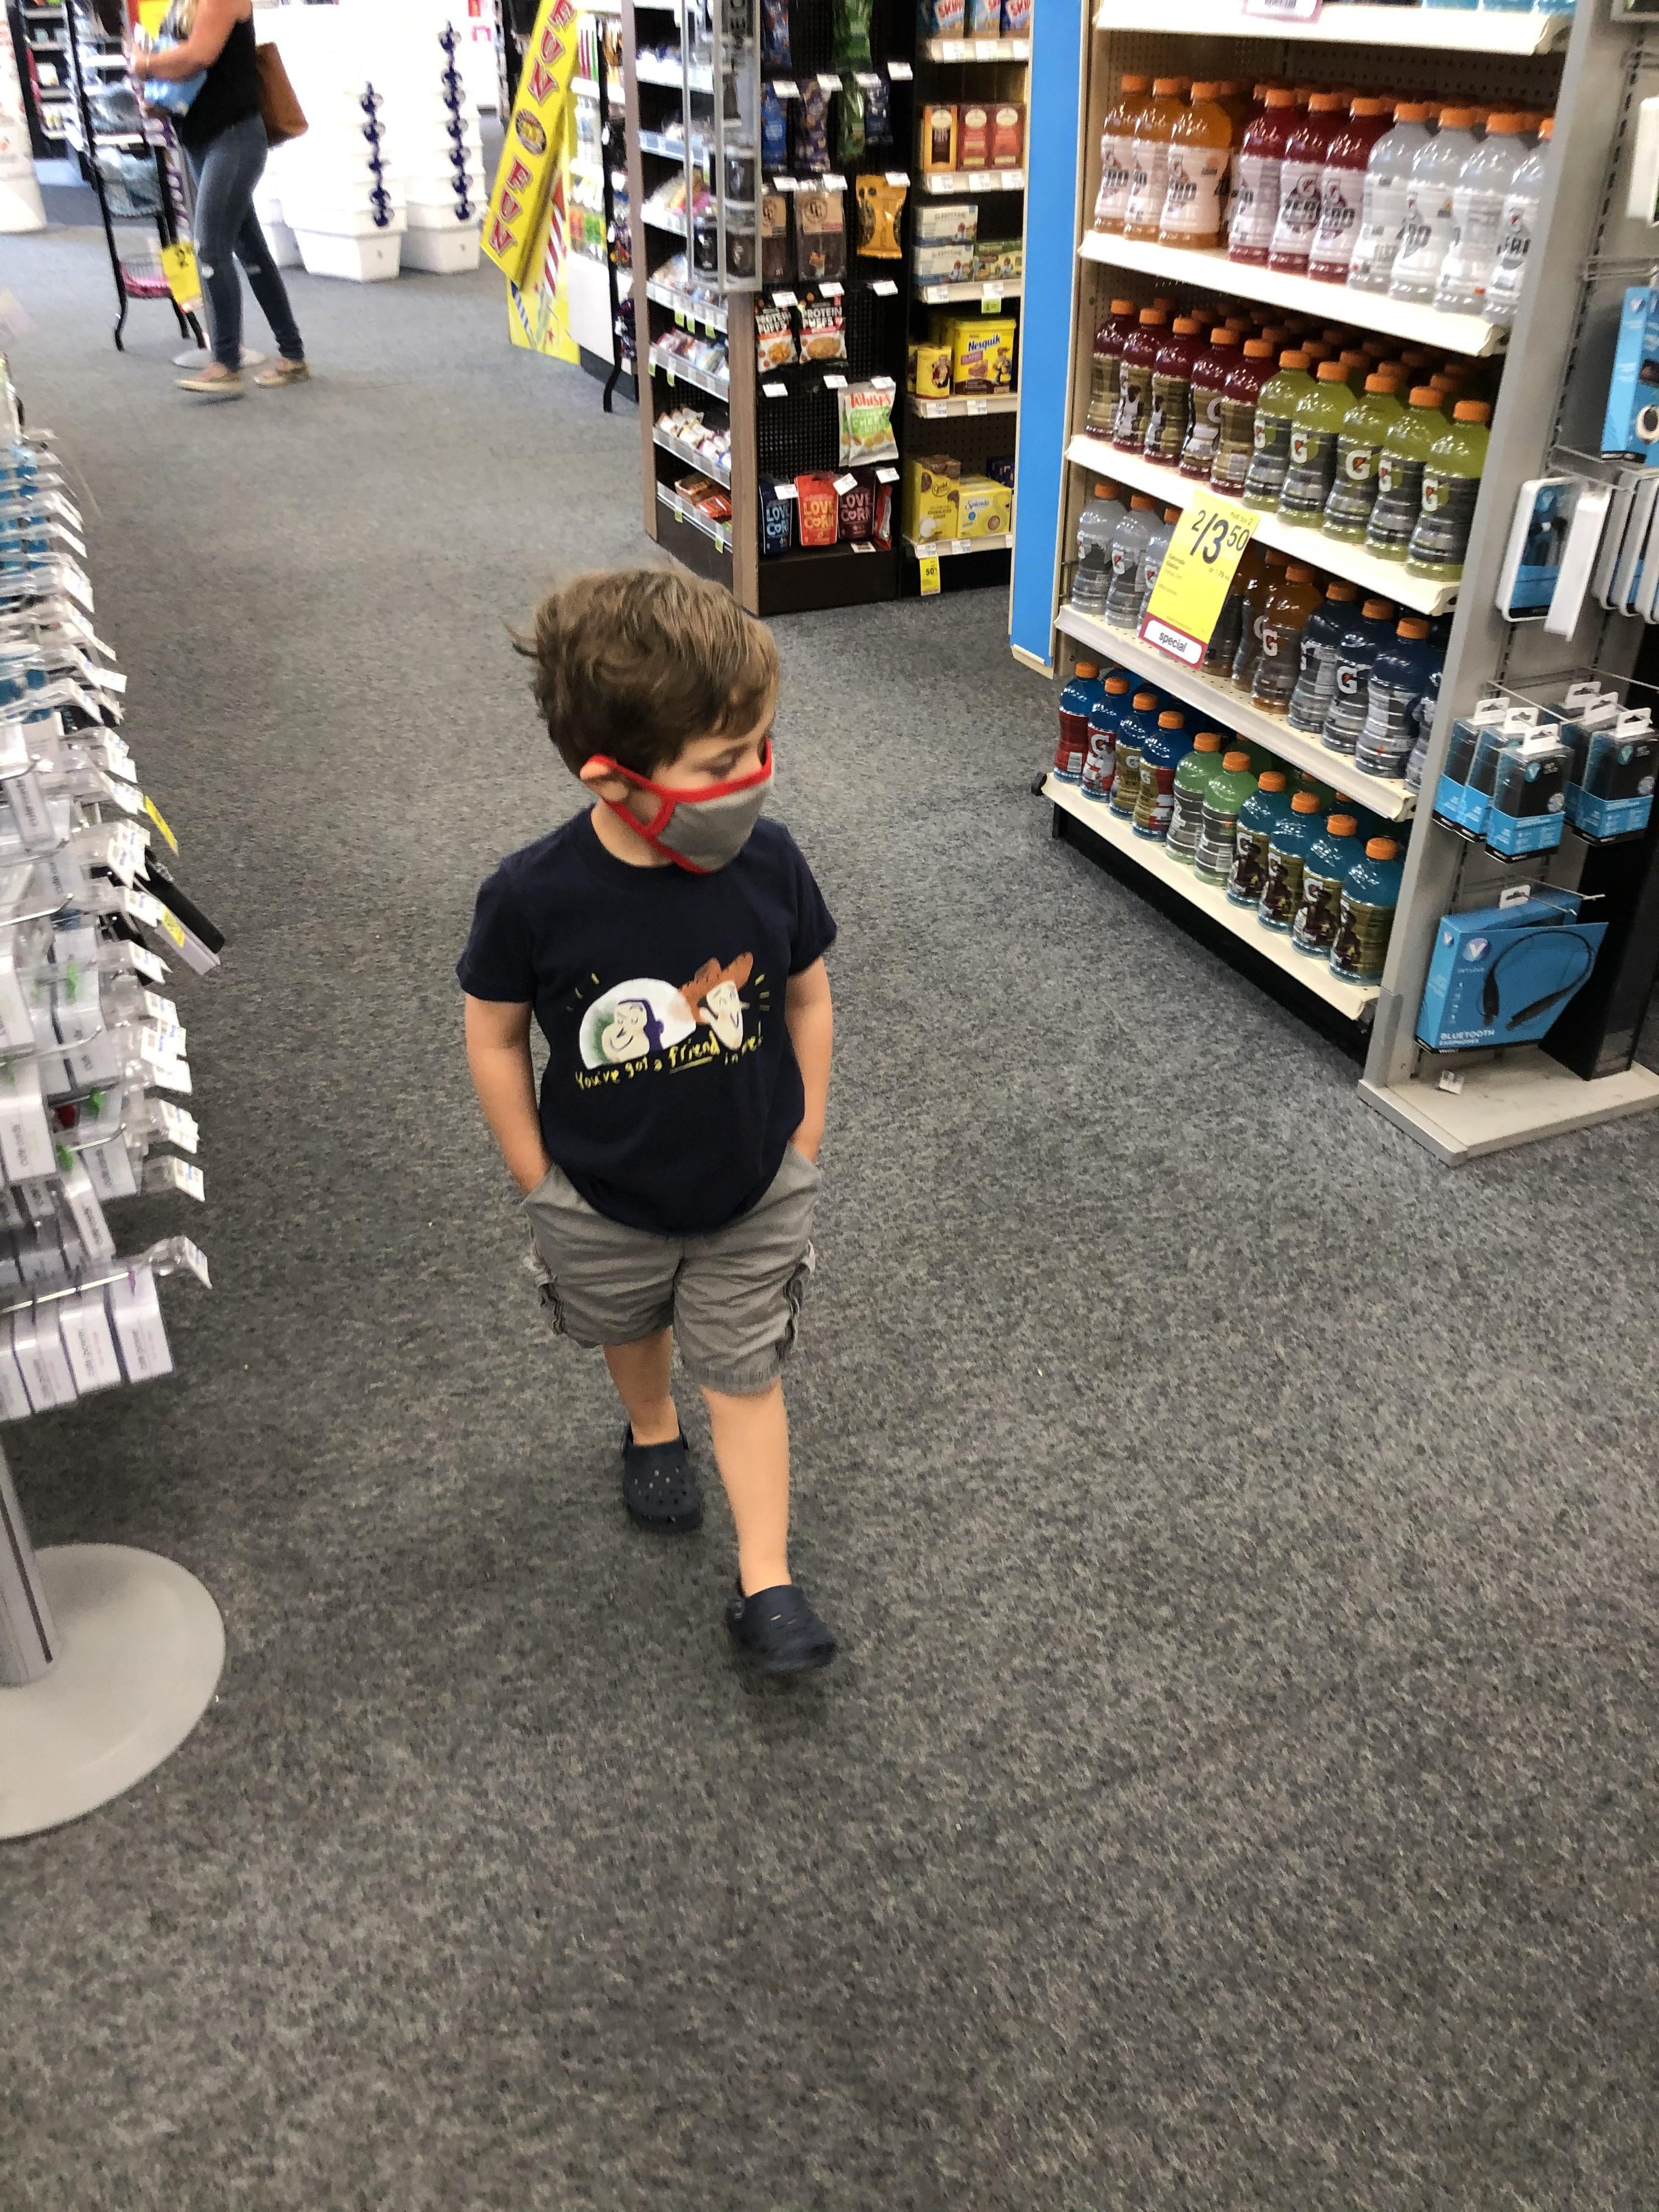 There’s something about my son walking the aisles in a mask with his hands in his pockets that makes it seem like he’s the regional manager checking it out.